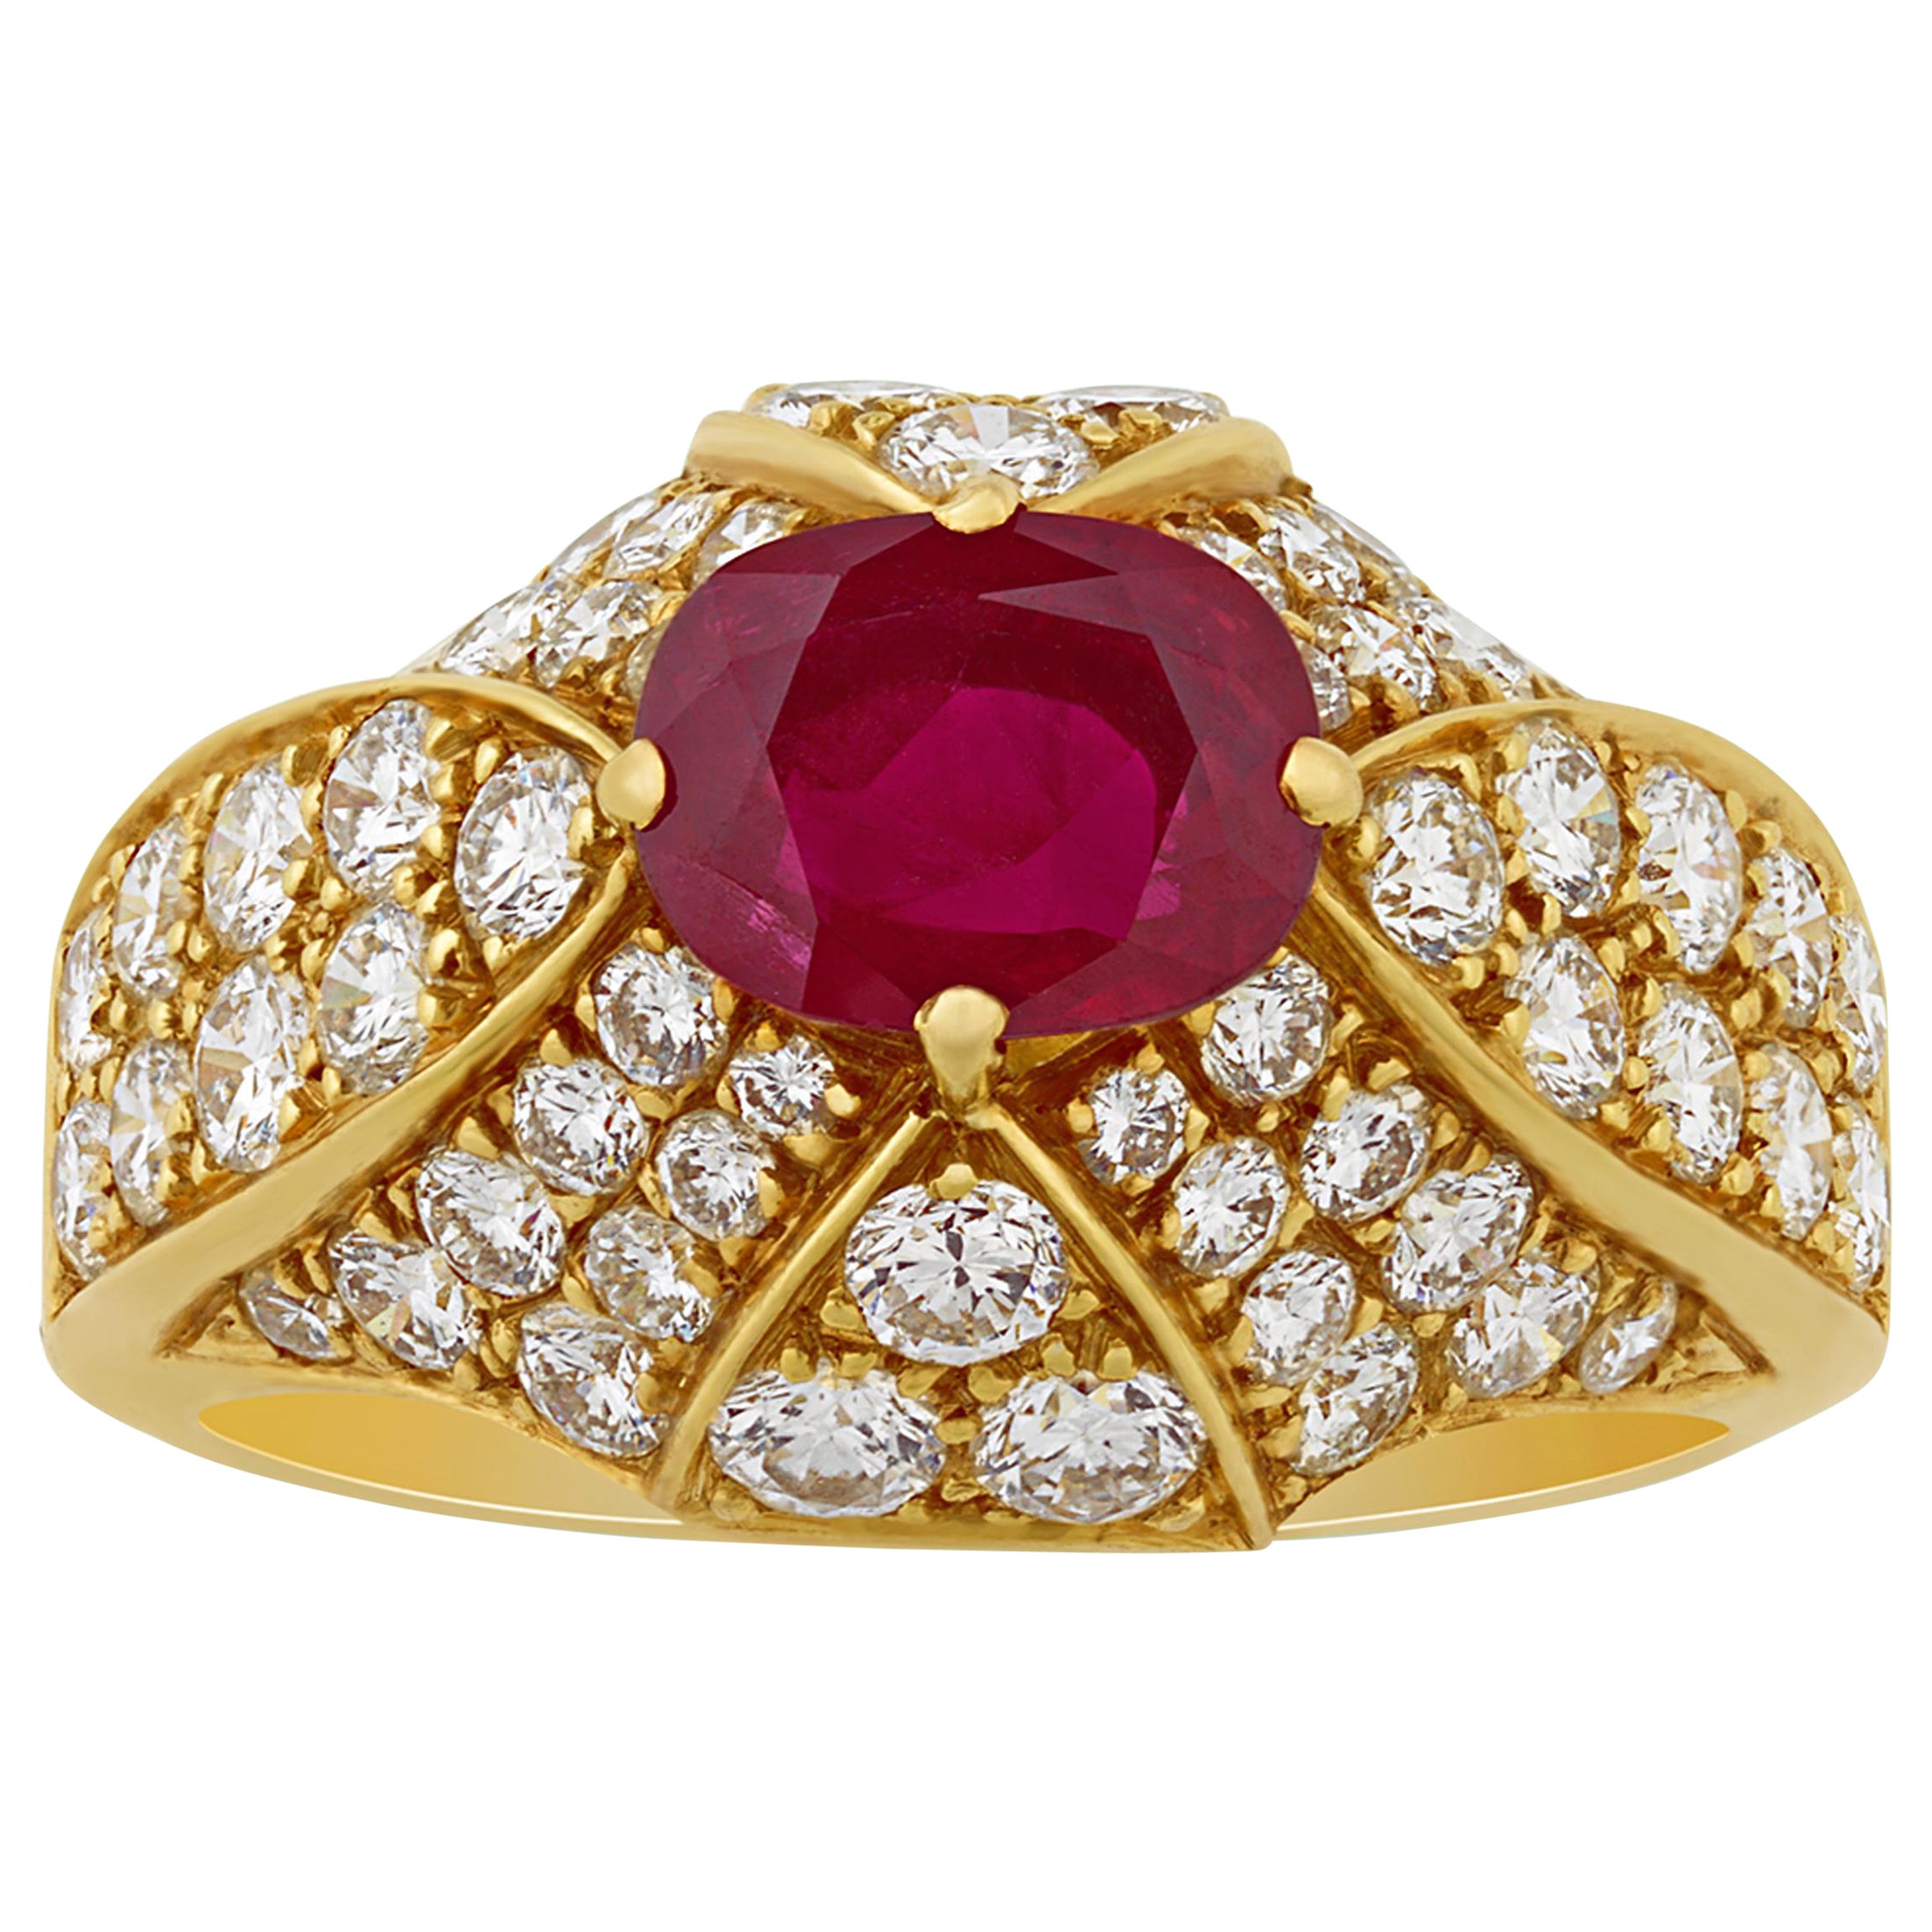 Cartier Ruby Ring, 0.70 Carats